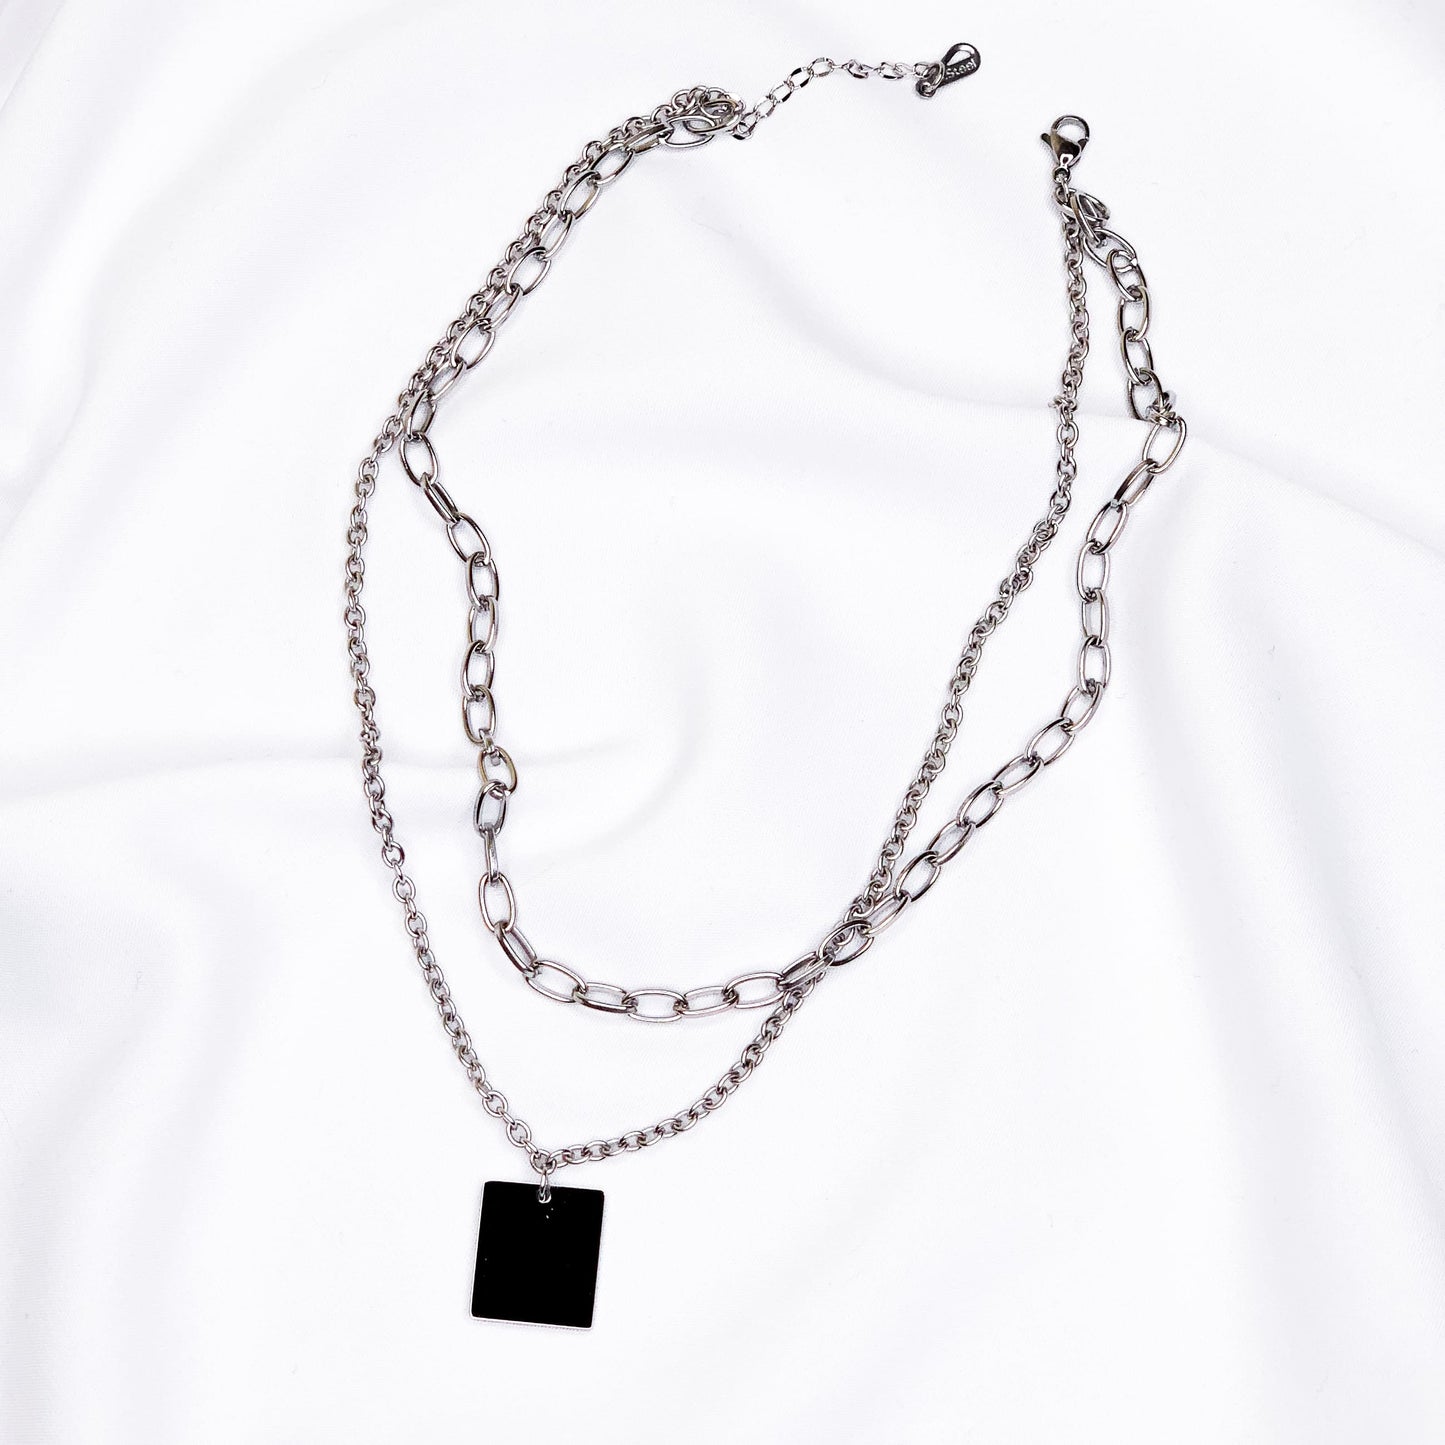 Steel chain choker necklace with square pendant